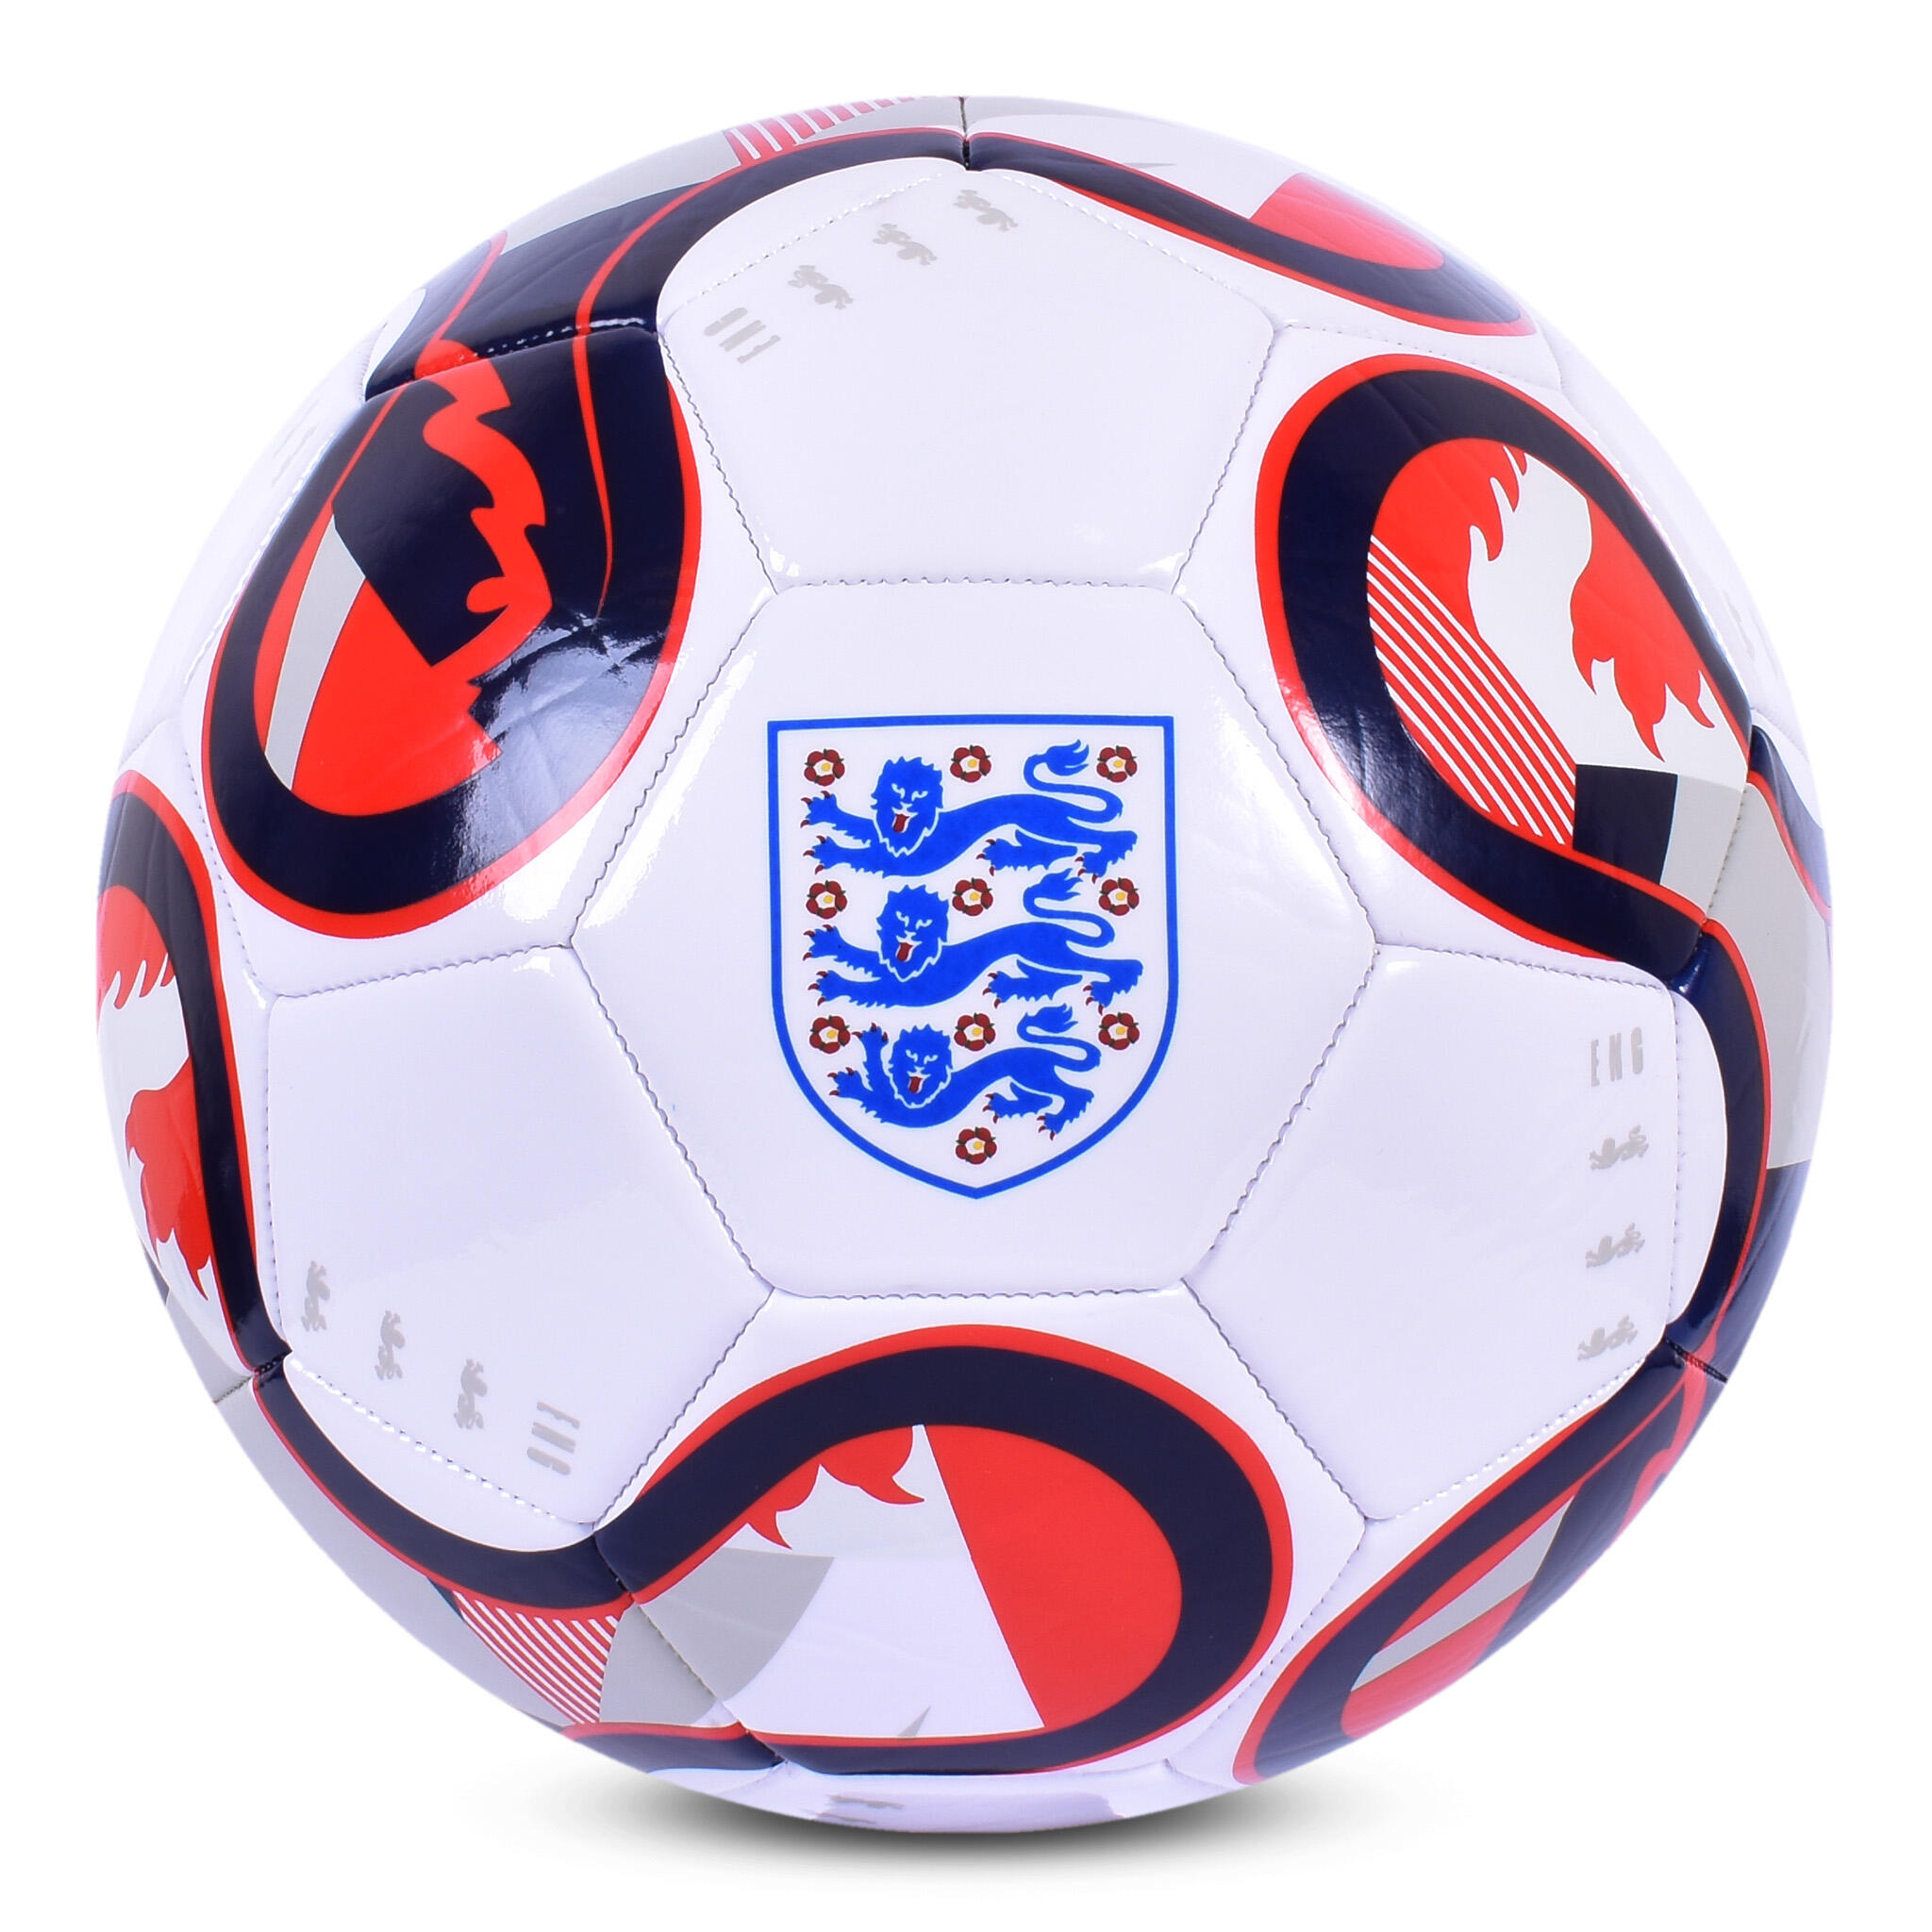 England Supporter Football Size 5 White Red Blue 1/3